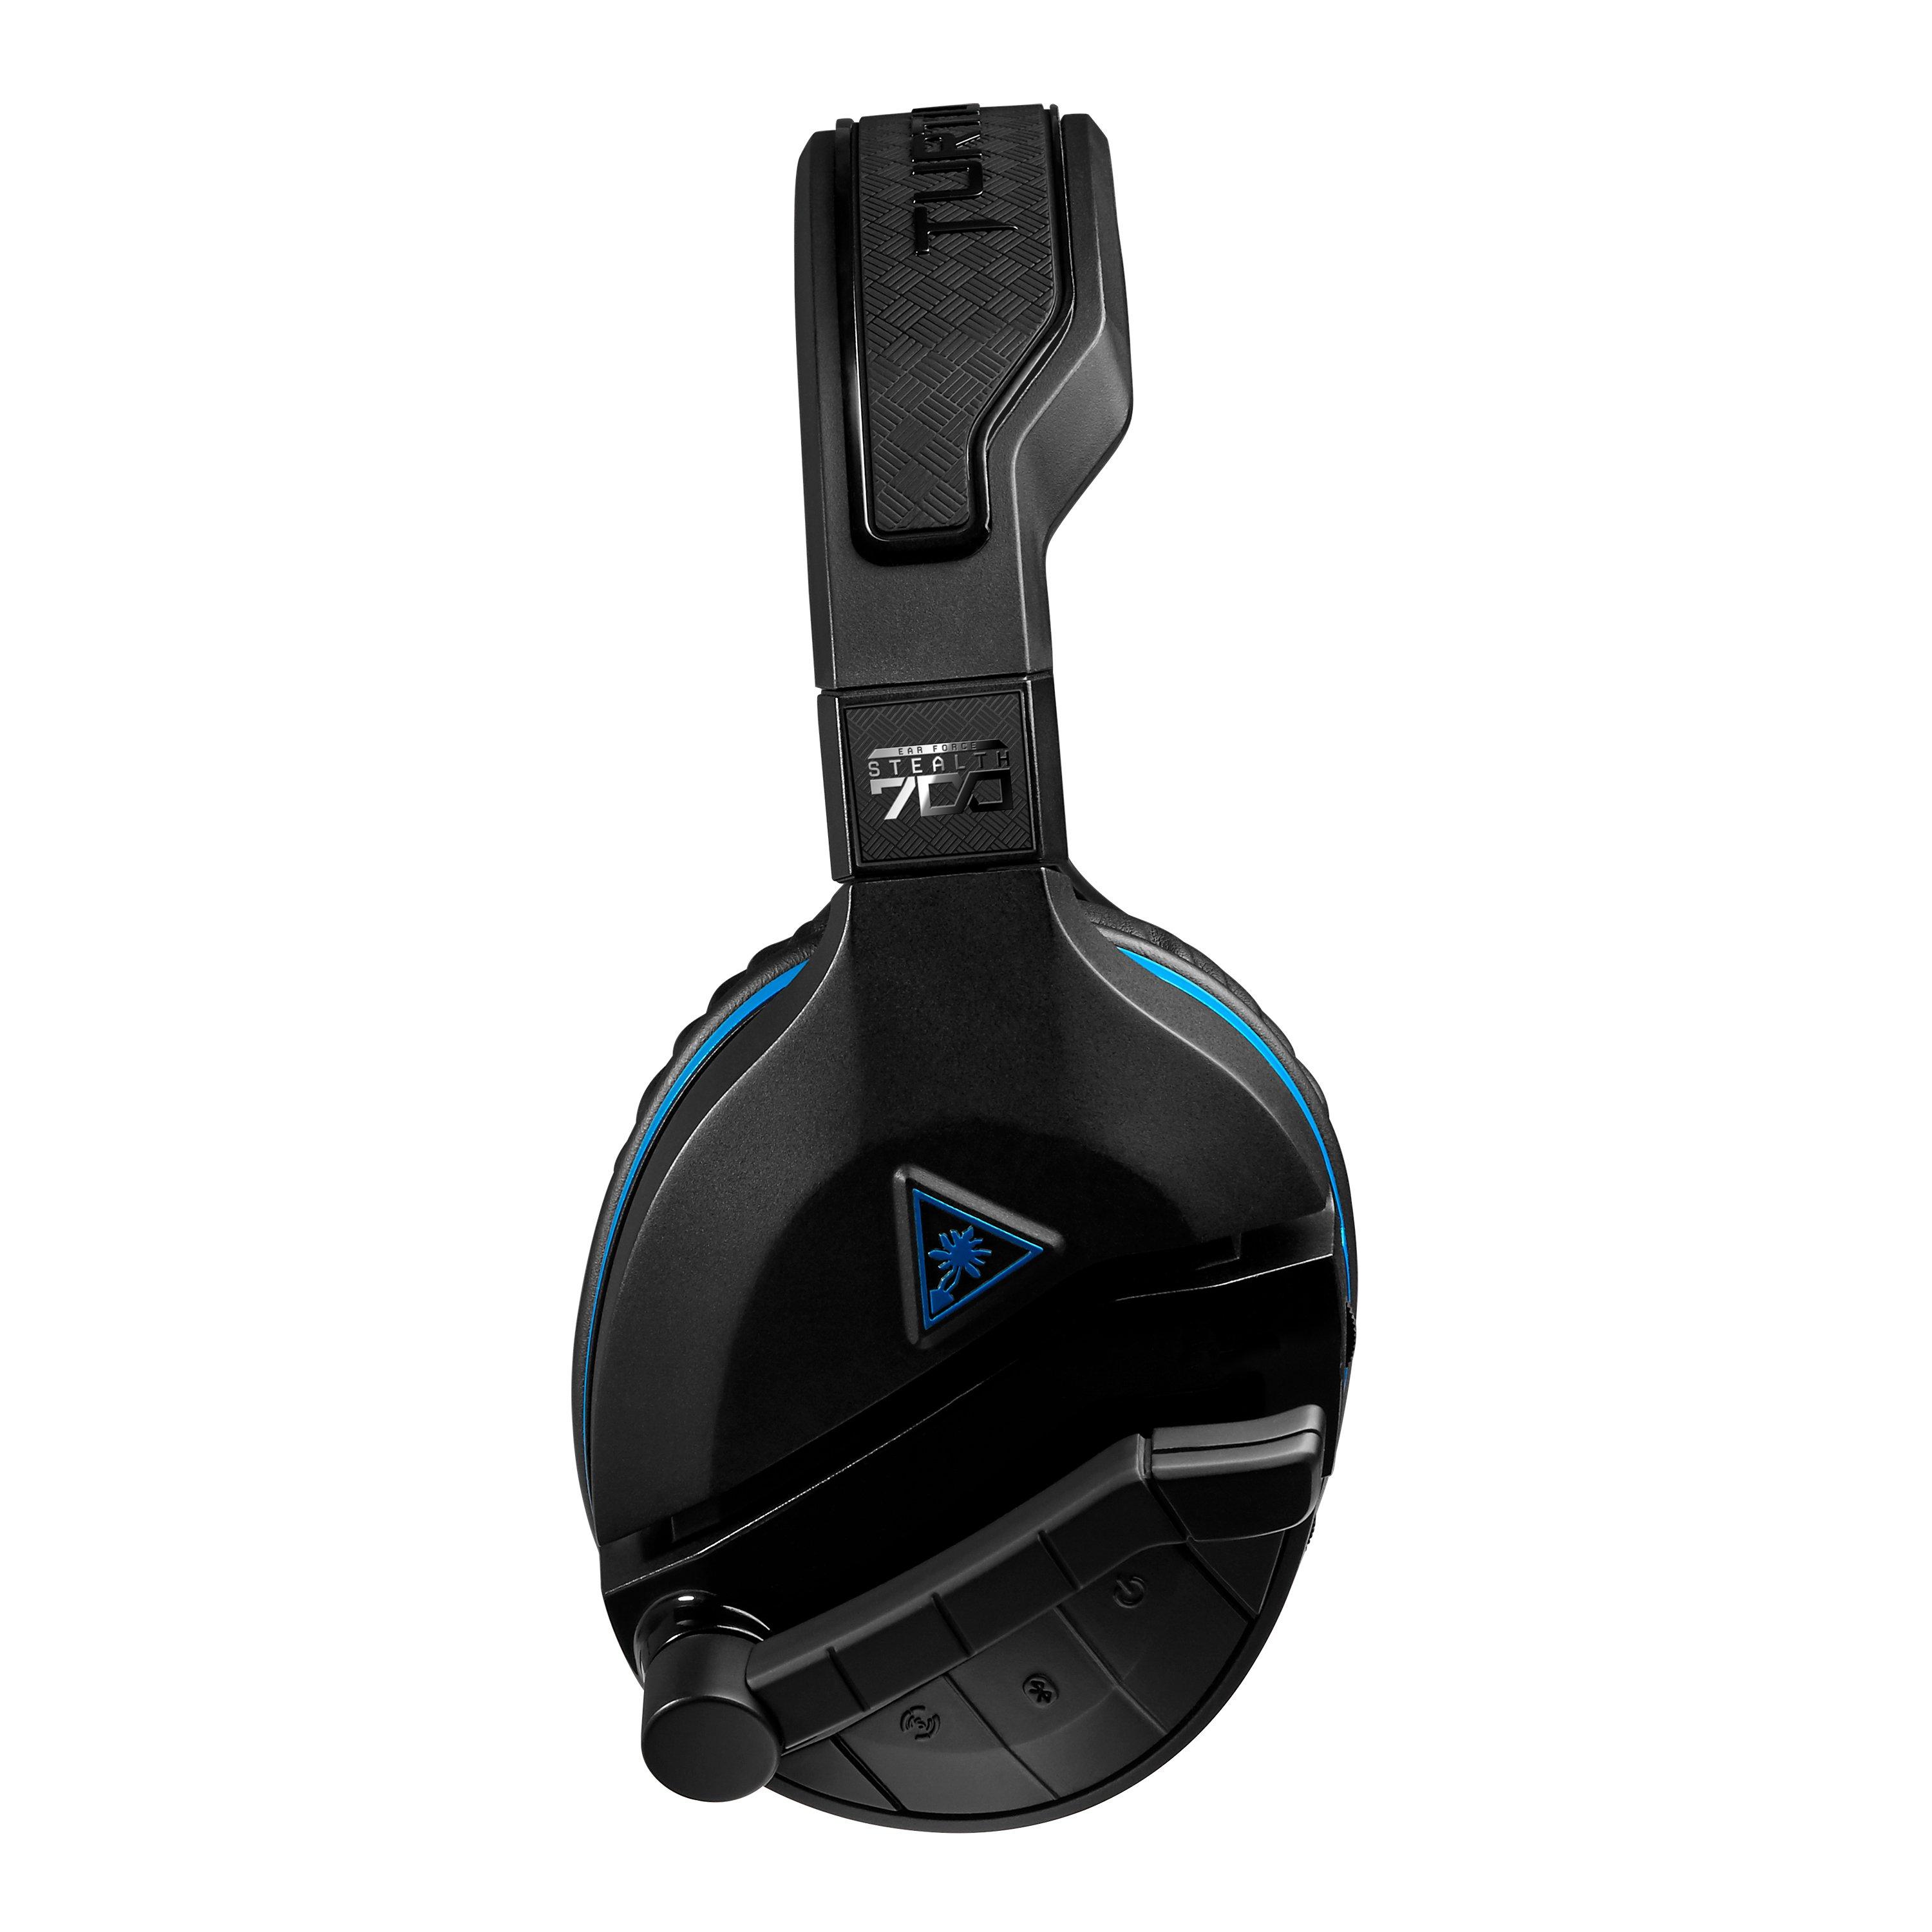 stealth 700 ps4 headset